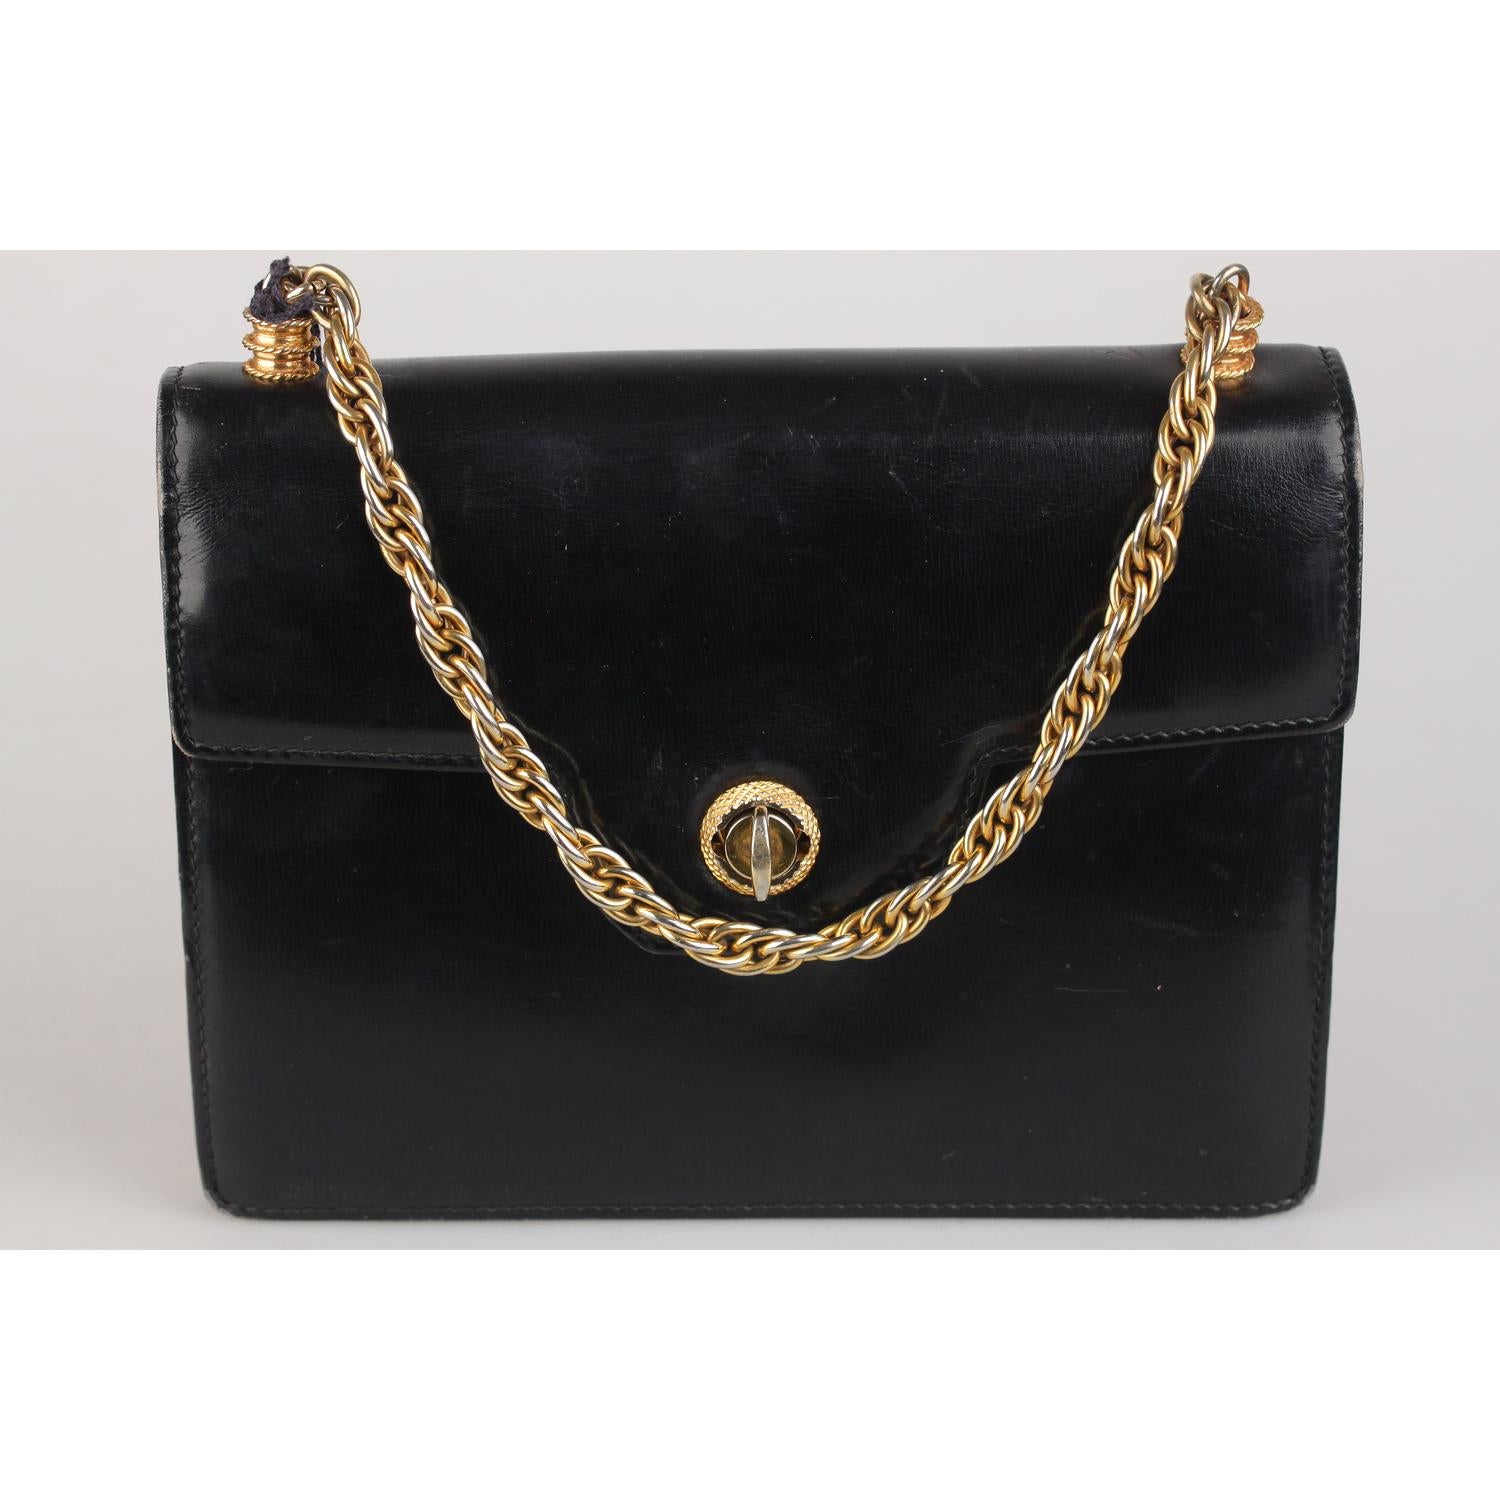 Vintage GUCCI handbag from the 1960s, crafted in black genuine leather and gold metal chain handle. Flap with twist closure. Leather interior with 3 sideopen pockets and 1 side zip pockets. 'Made in Italy by GUCCI' embossed